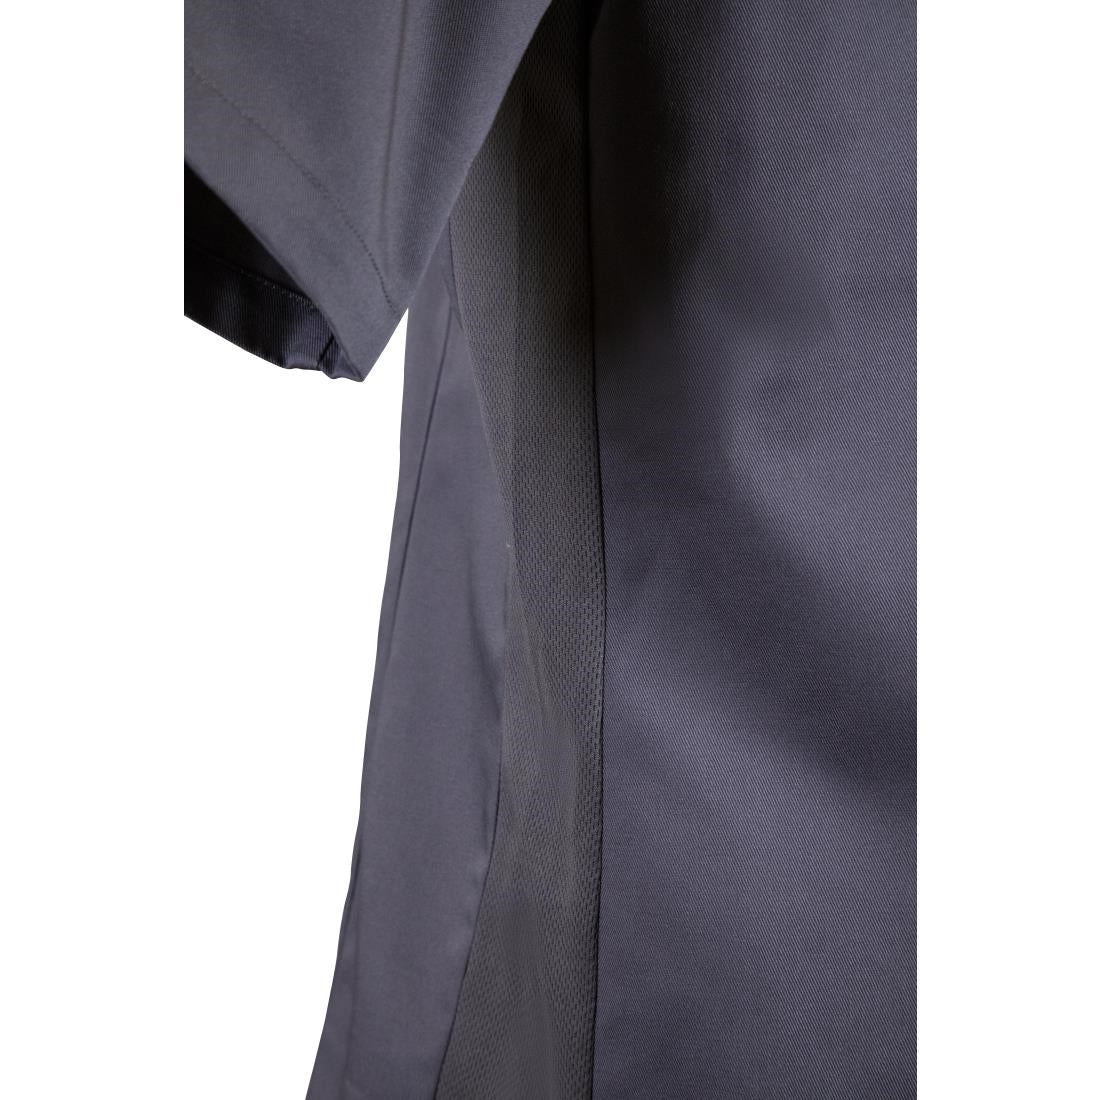 BB712-S Southside Band Collar Chefs Jacket Charcoal Size S JD Catering Equipment Solutions Ltd